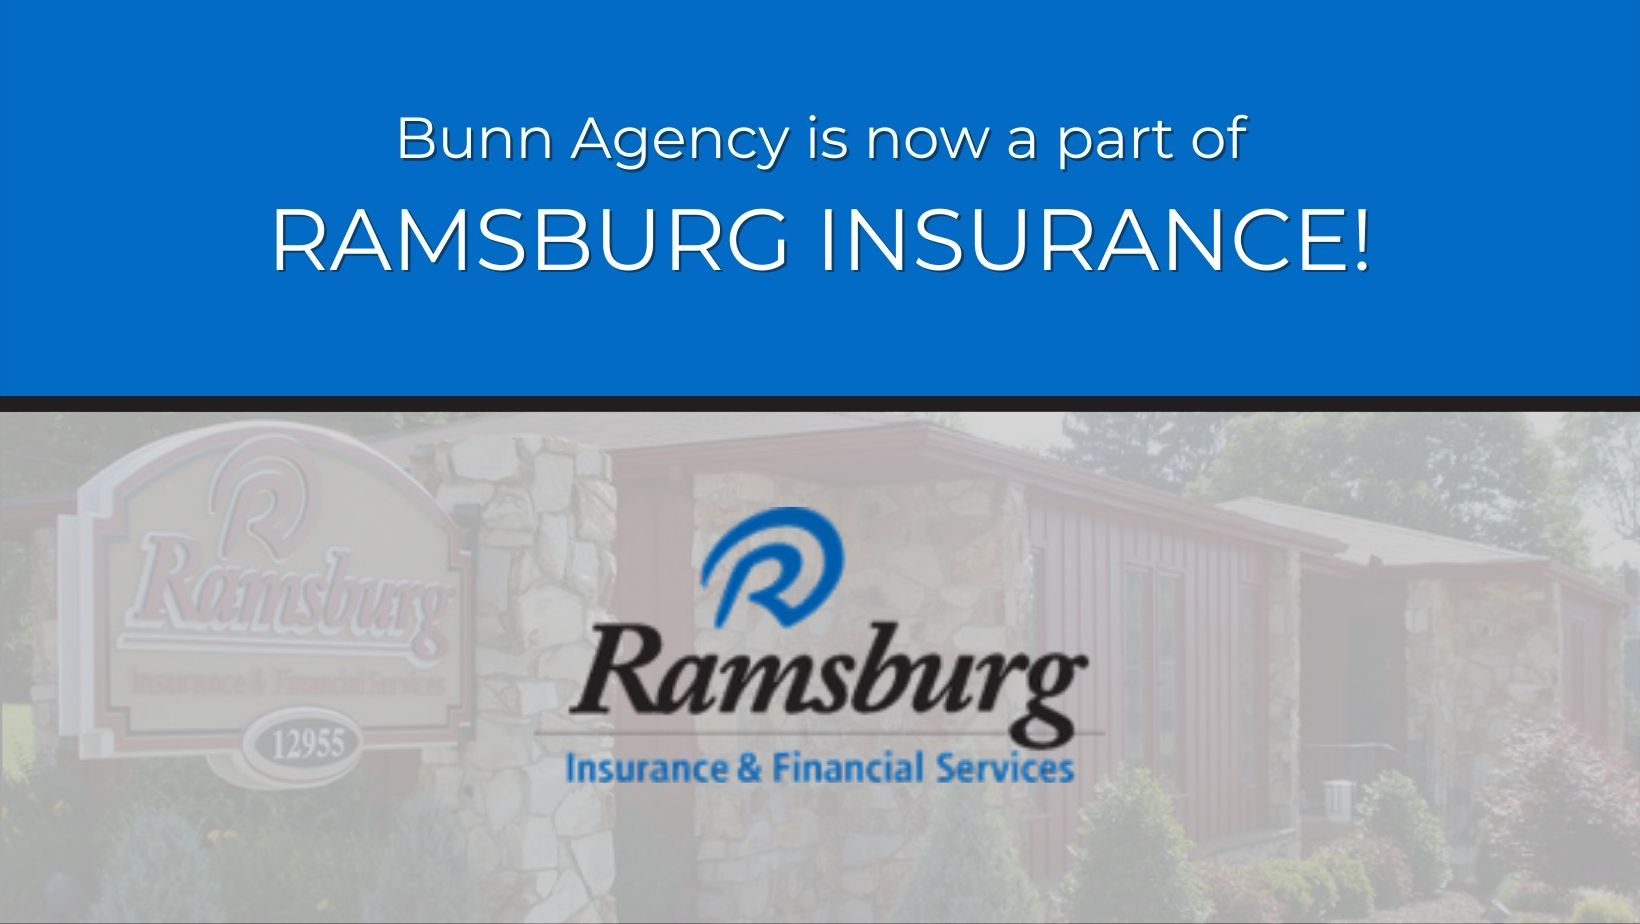 blog title header with Ramsburg logo and image of Ramsburg Agency